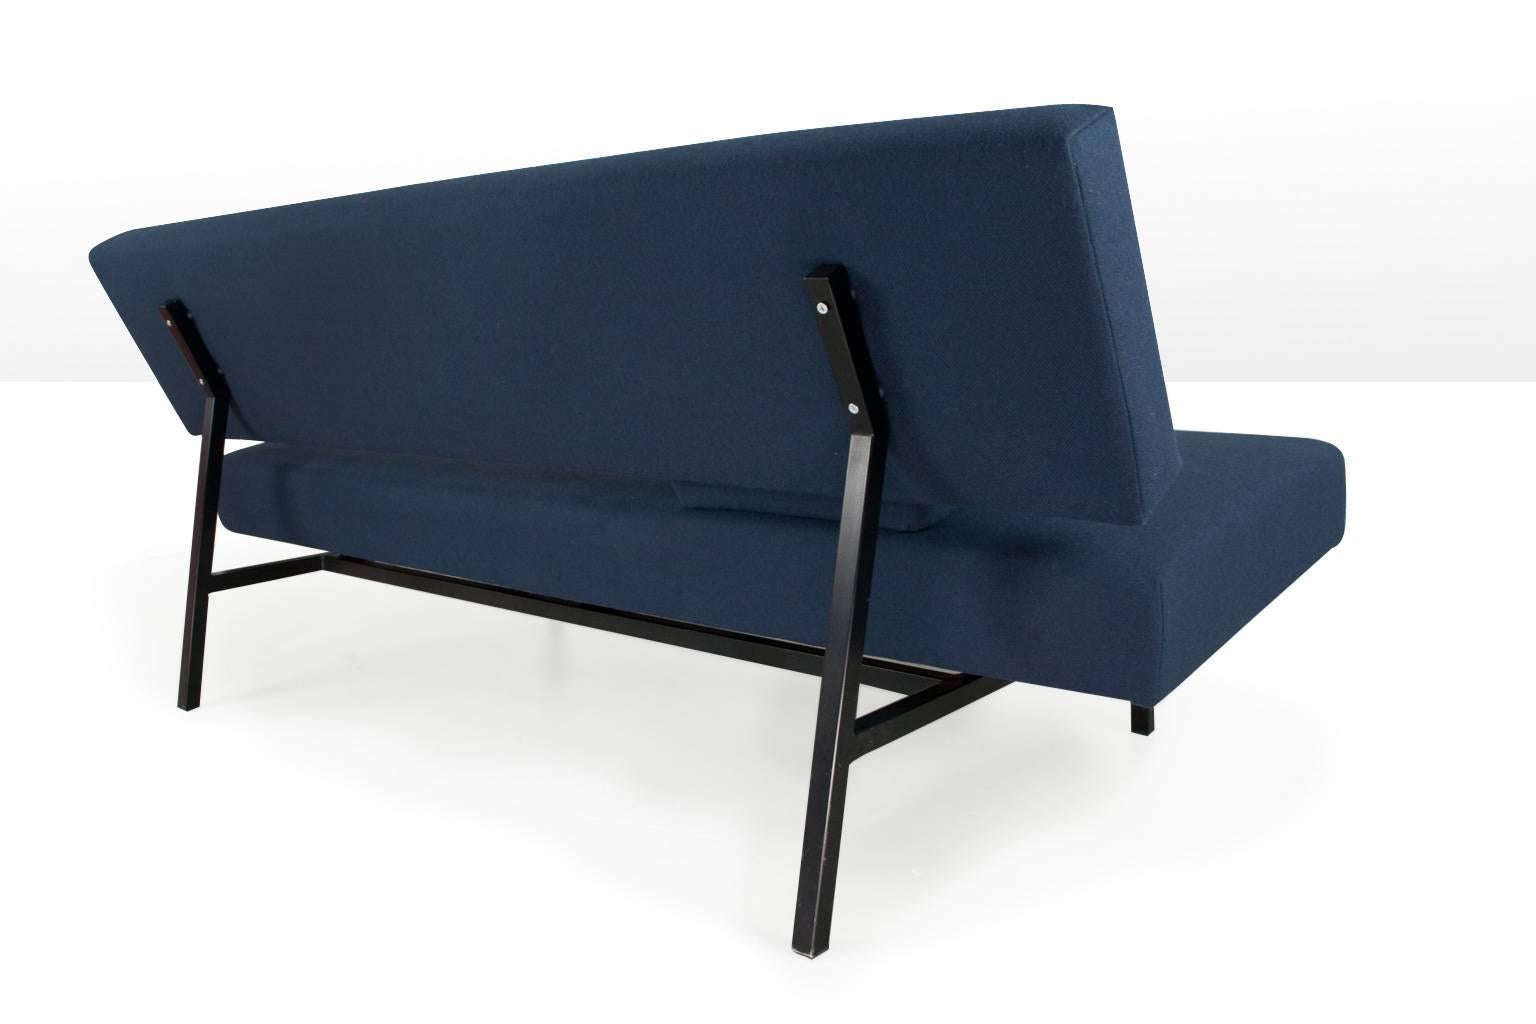 New upholstered Dutch Martin Visser BZ53 sofa in Ploegwool for ‘t Spectrum, collection 1964-1971. This sofa is the petit version of the BR03 and BR02 series, yet the BZ53 is not a day bed. This sofa is 160cm wide. New foam and upholstered in a